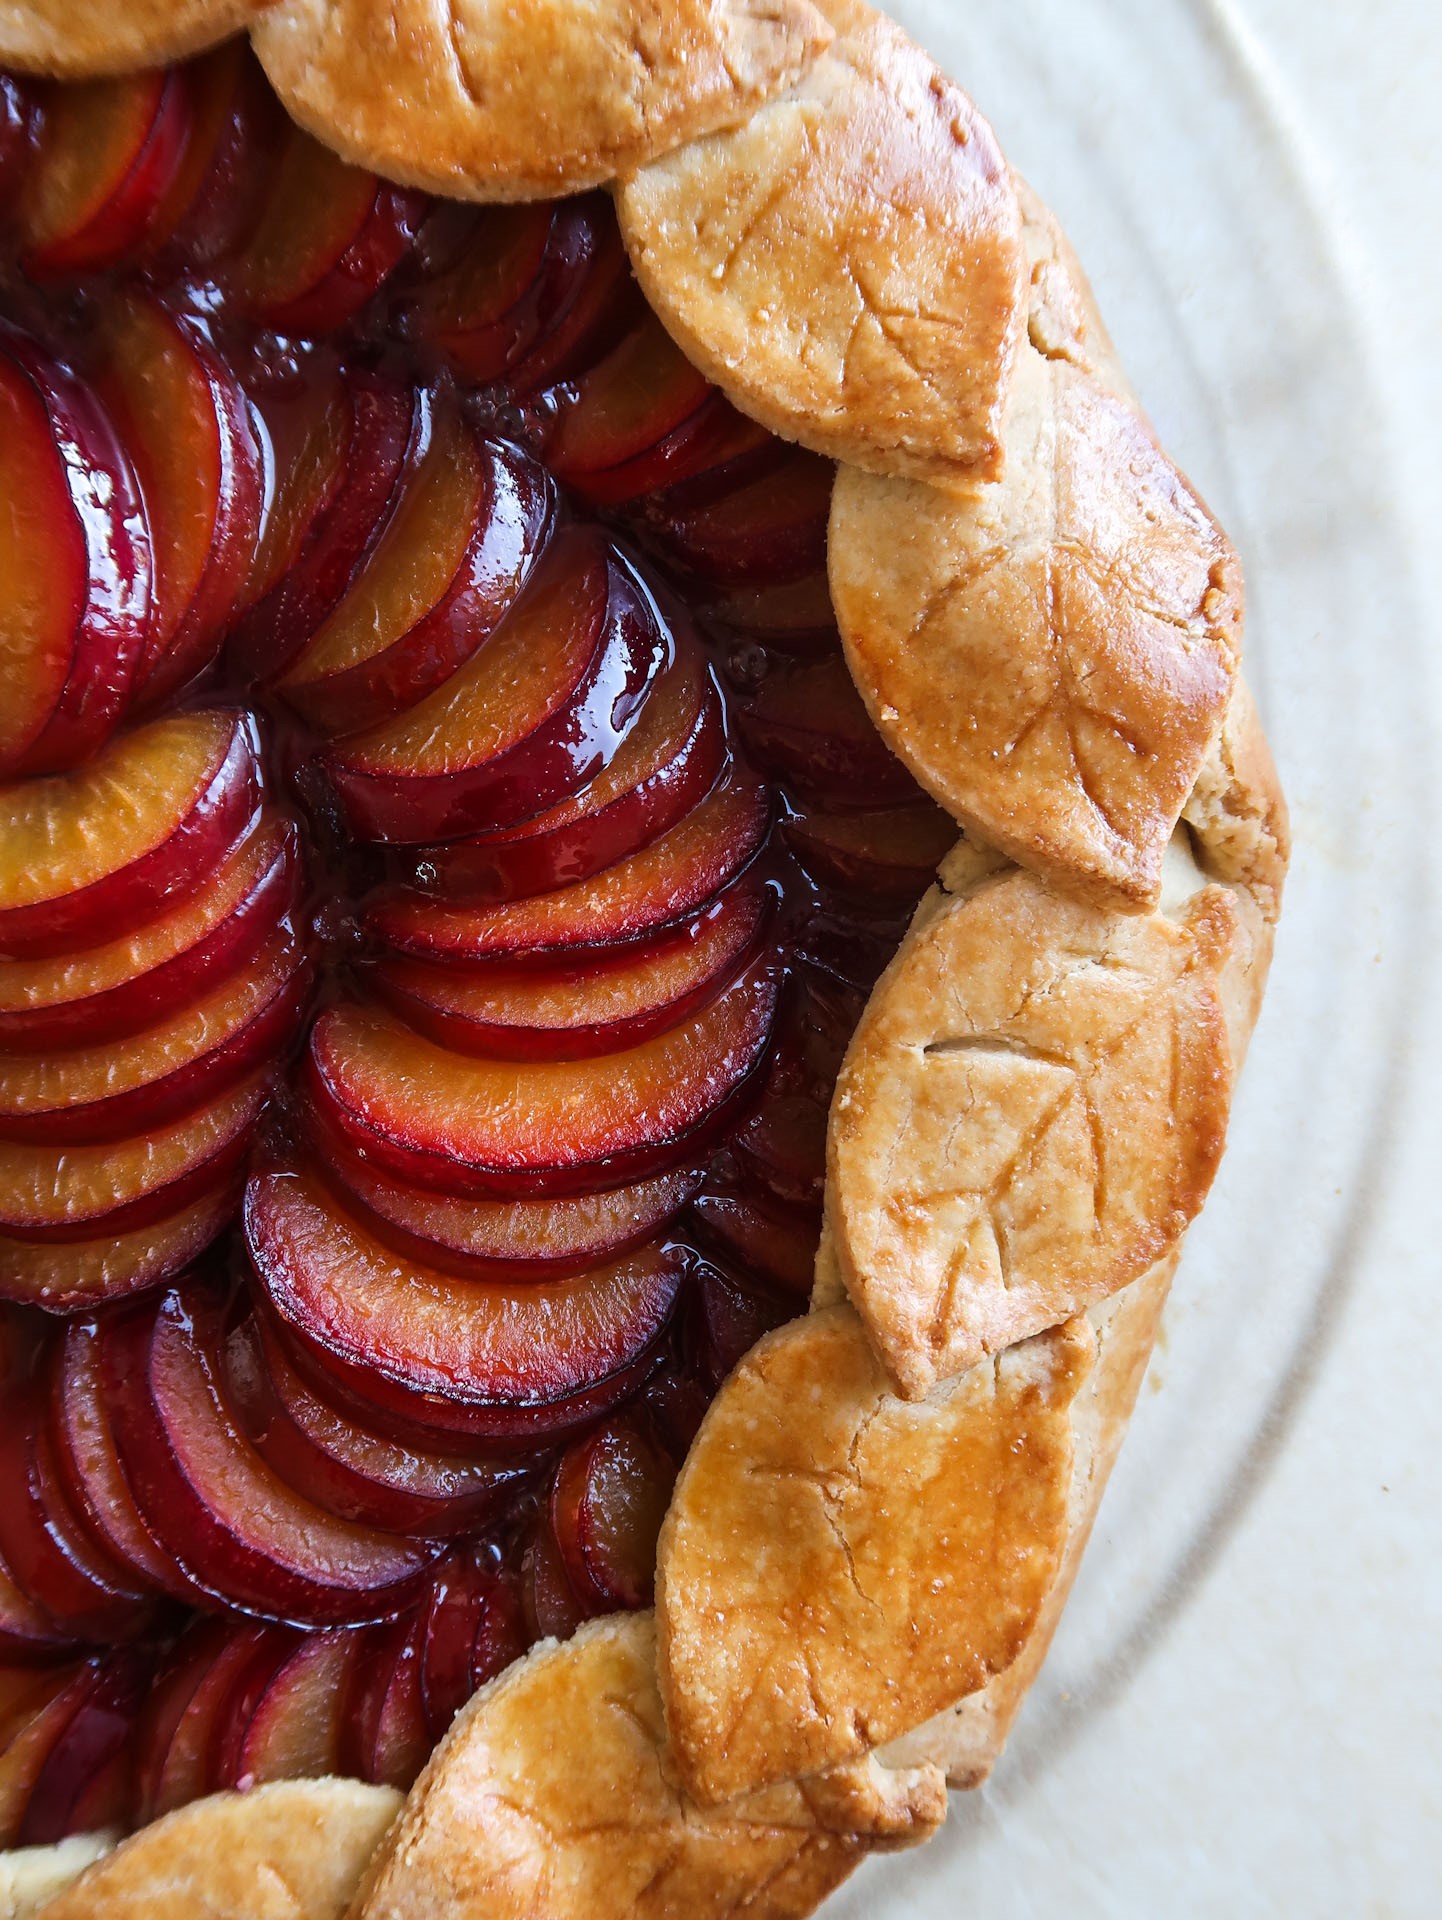 tart with decorated crust and slices of plum